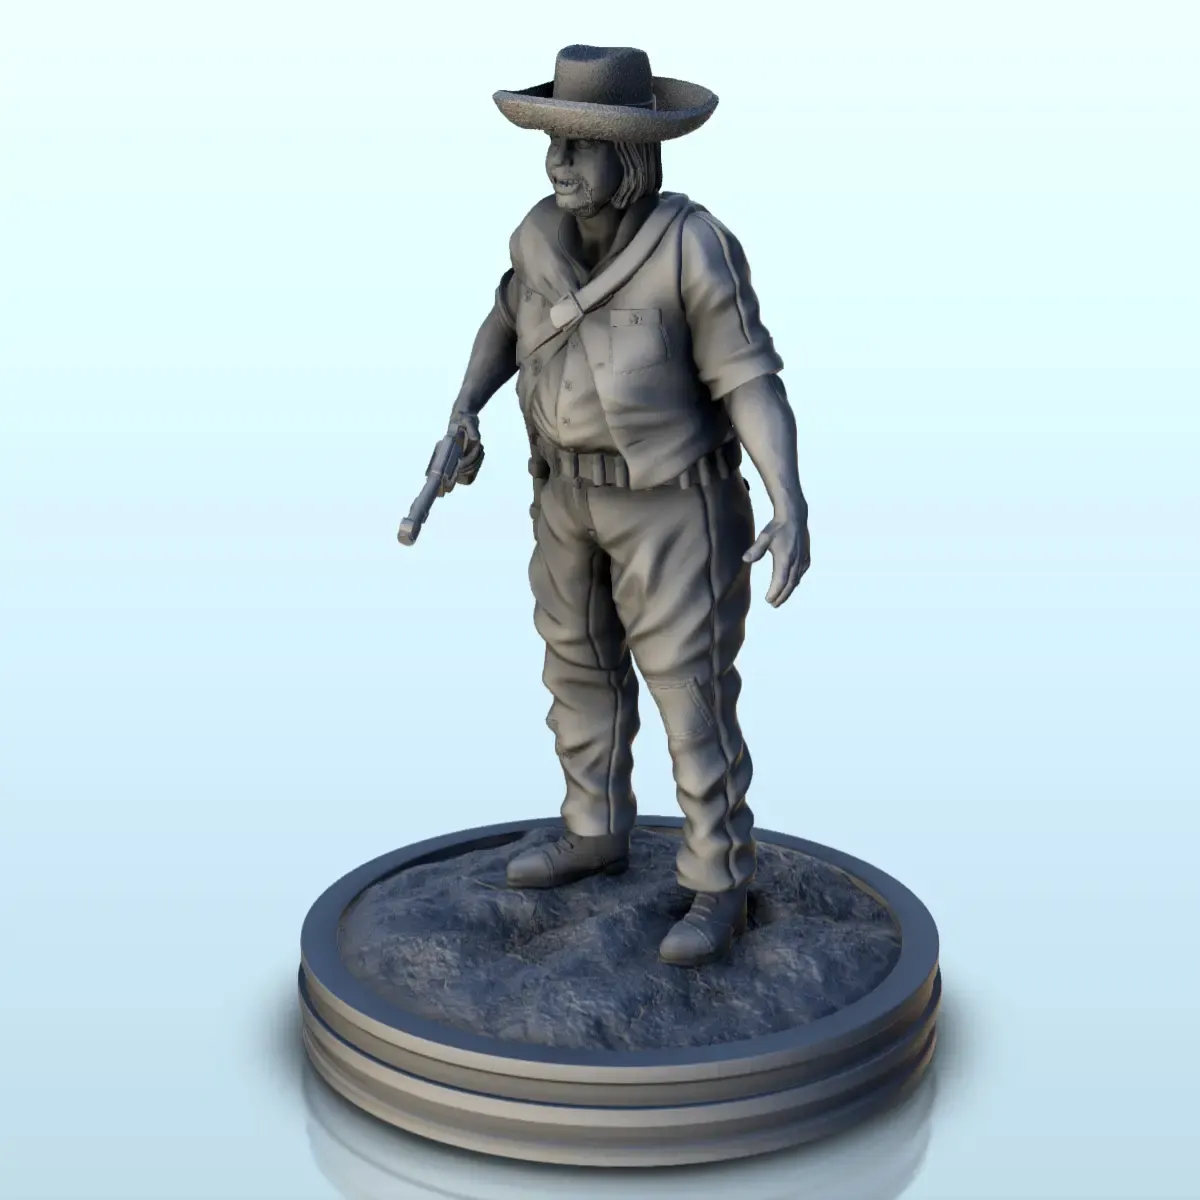 Bandit with hat and revolver (6) - Old West Figure miniature